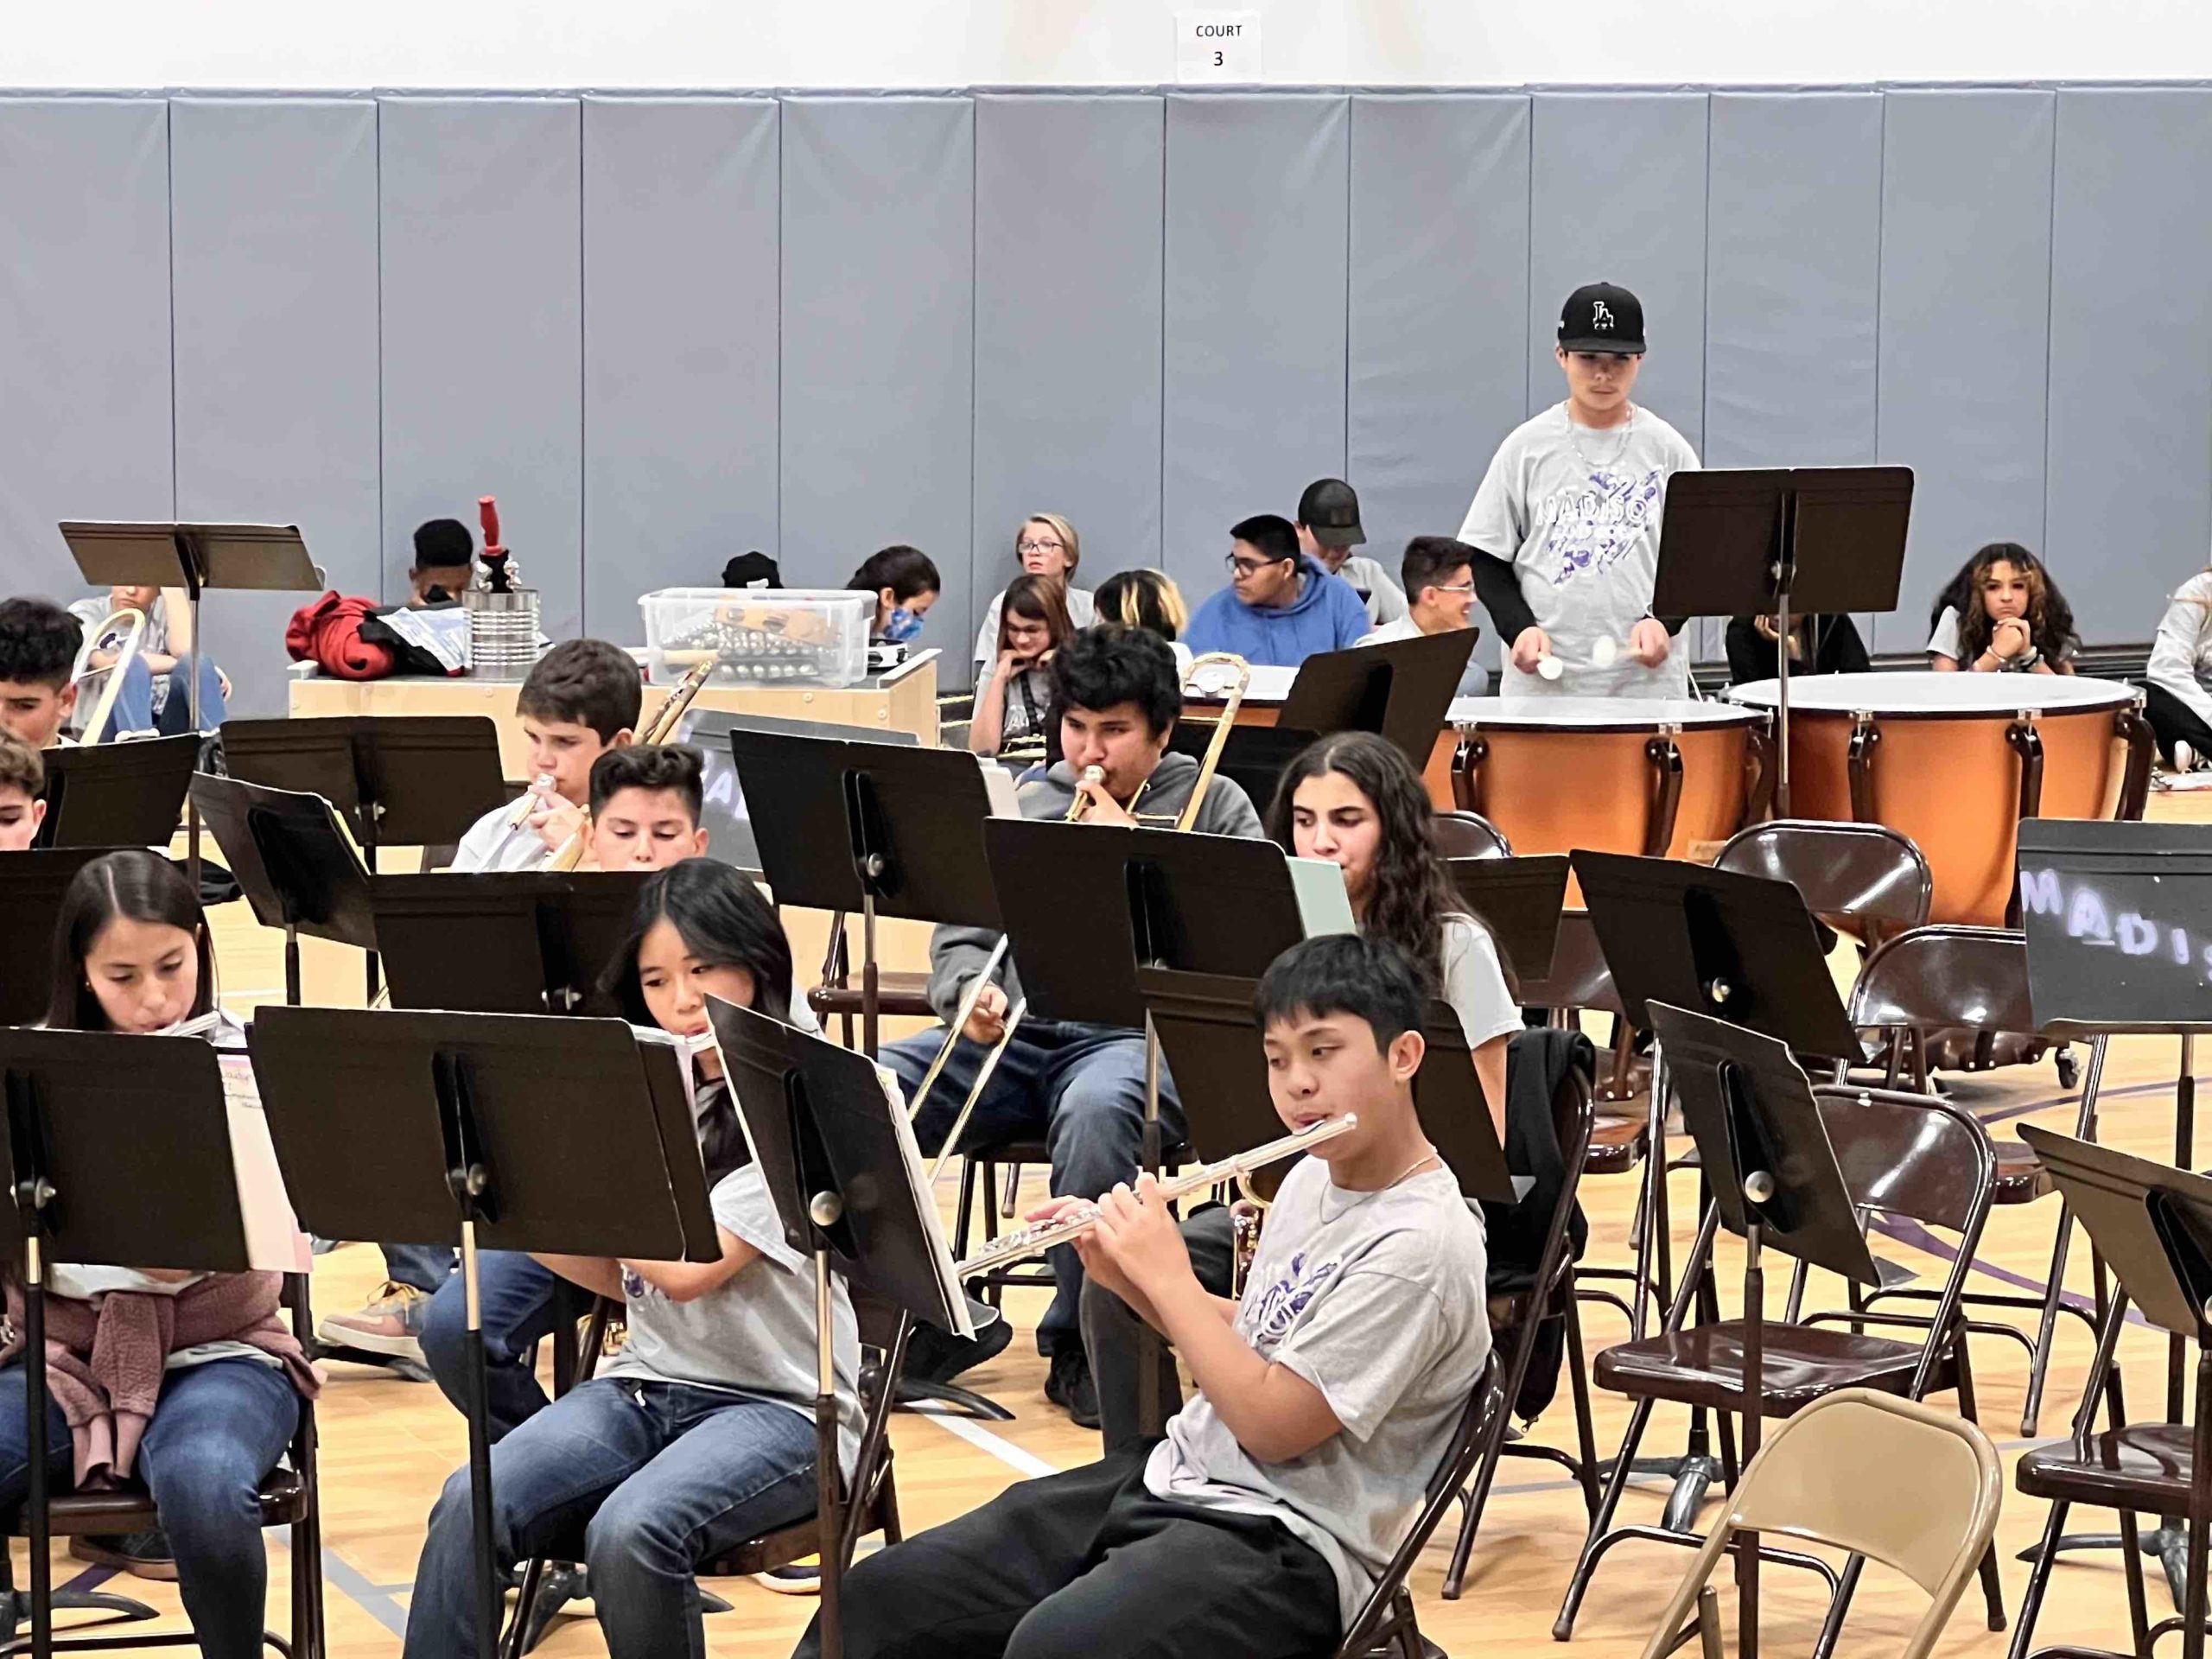 Madison MIddle School band performance Dec. 1, 2022 - 3